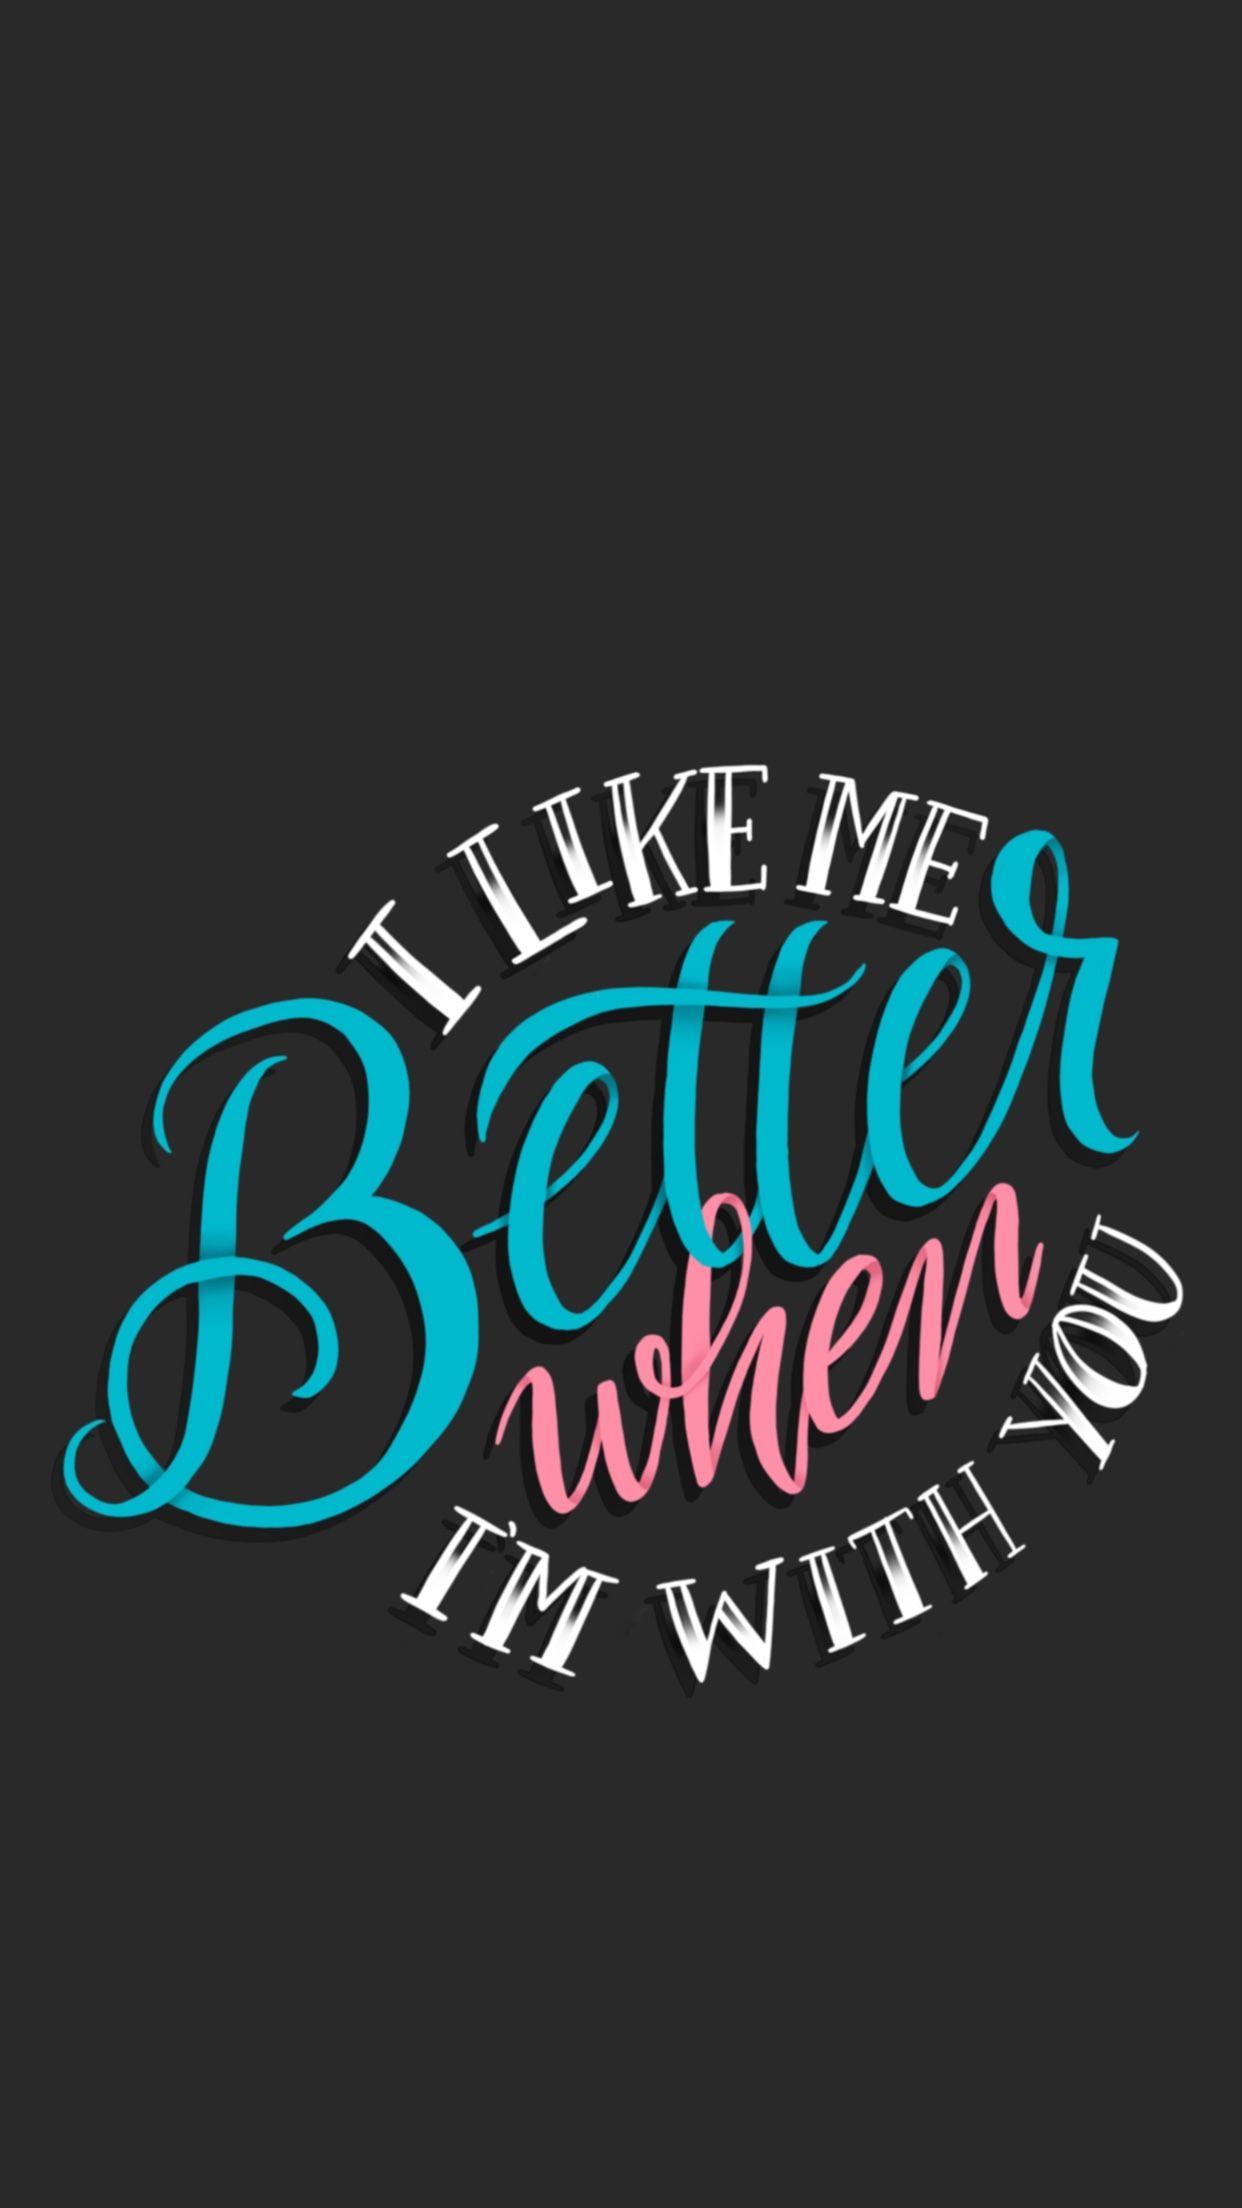 I Like Me Better by Lauv iPhone Wallpaper. Wallpaper iphone